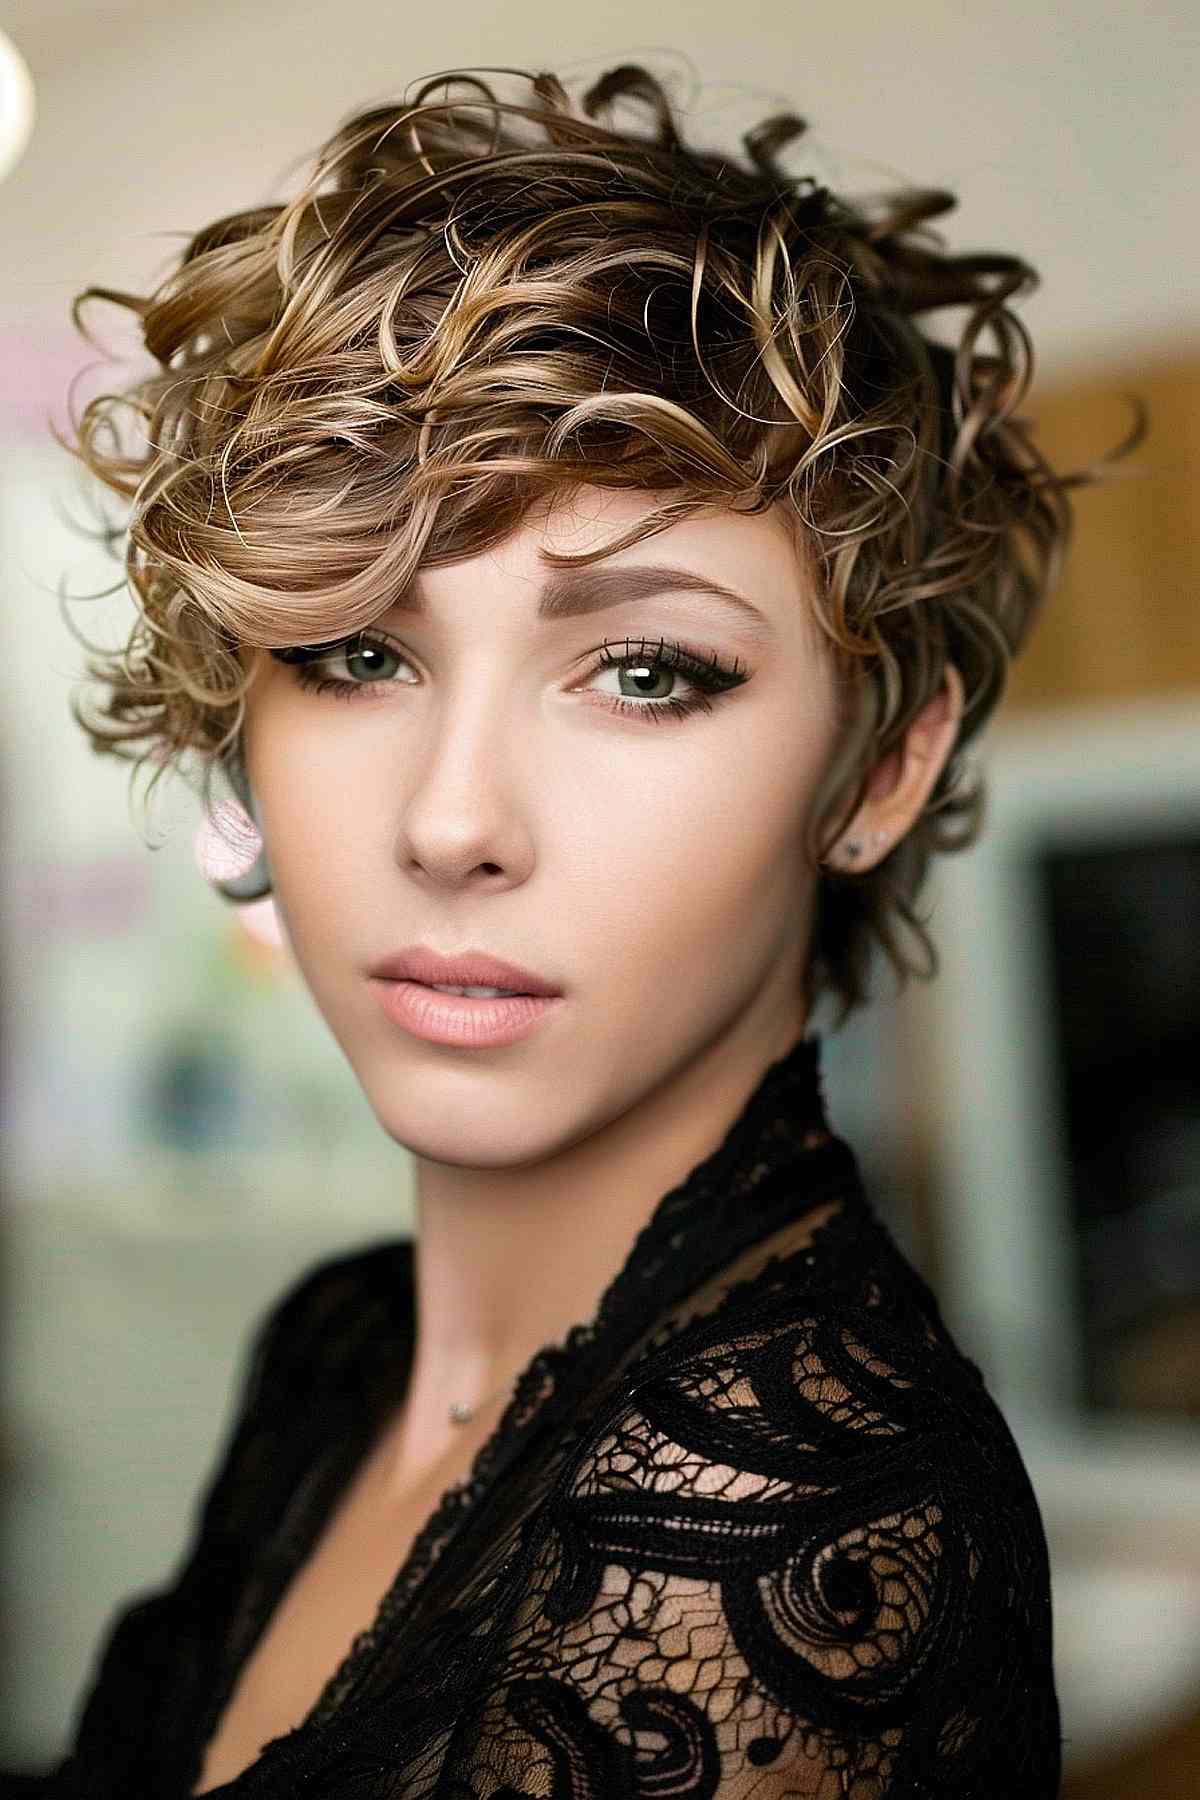 Aesthetic elf cut with curly accents, emphasizing defined and bouncy natural curls.